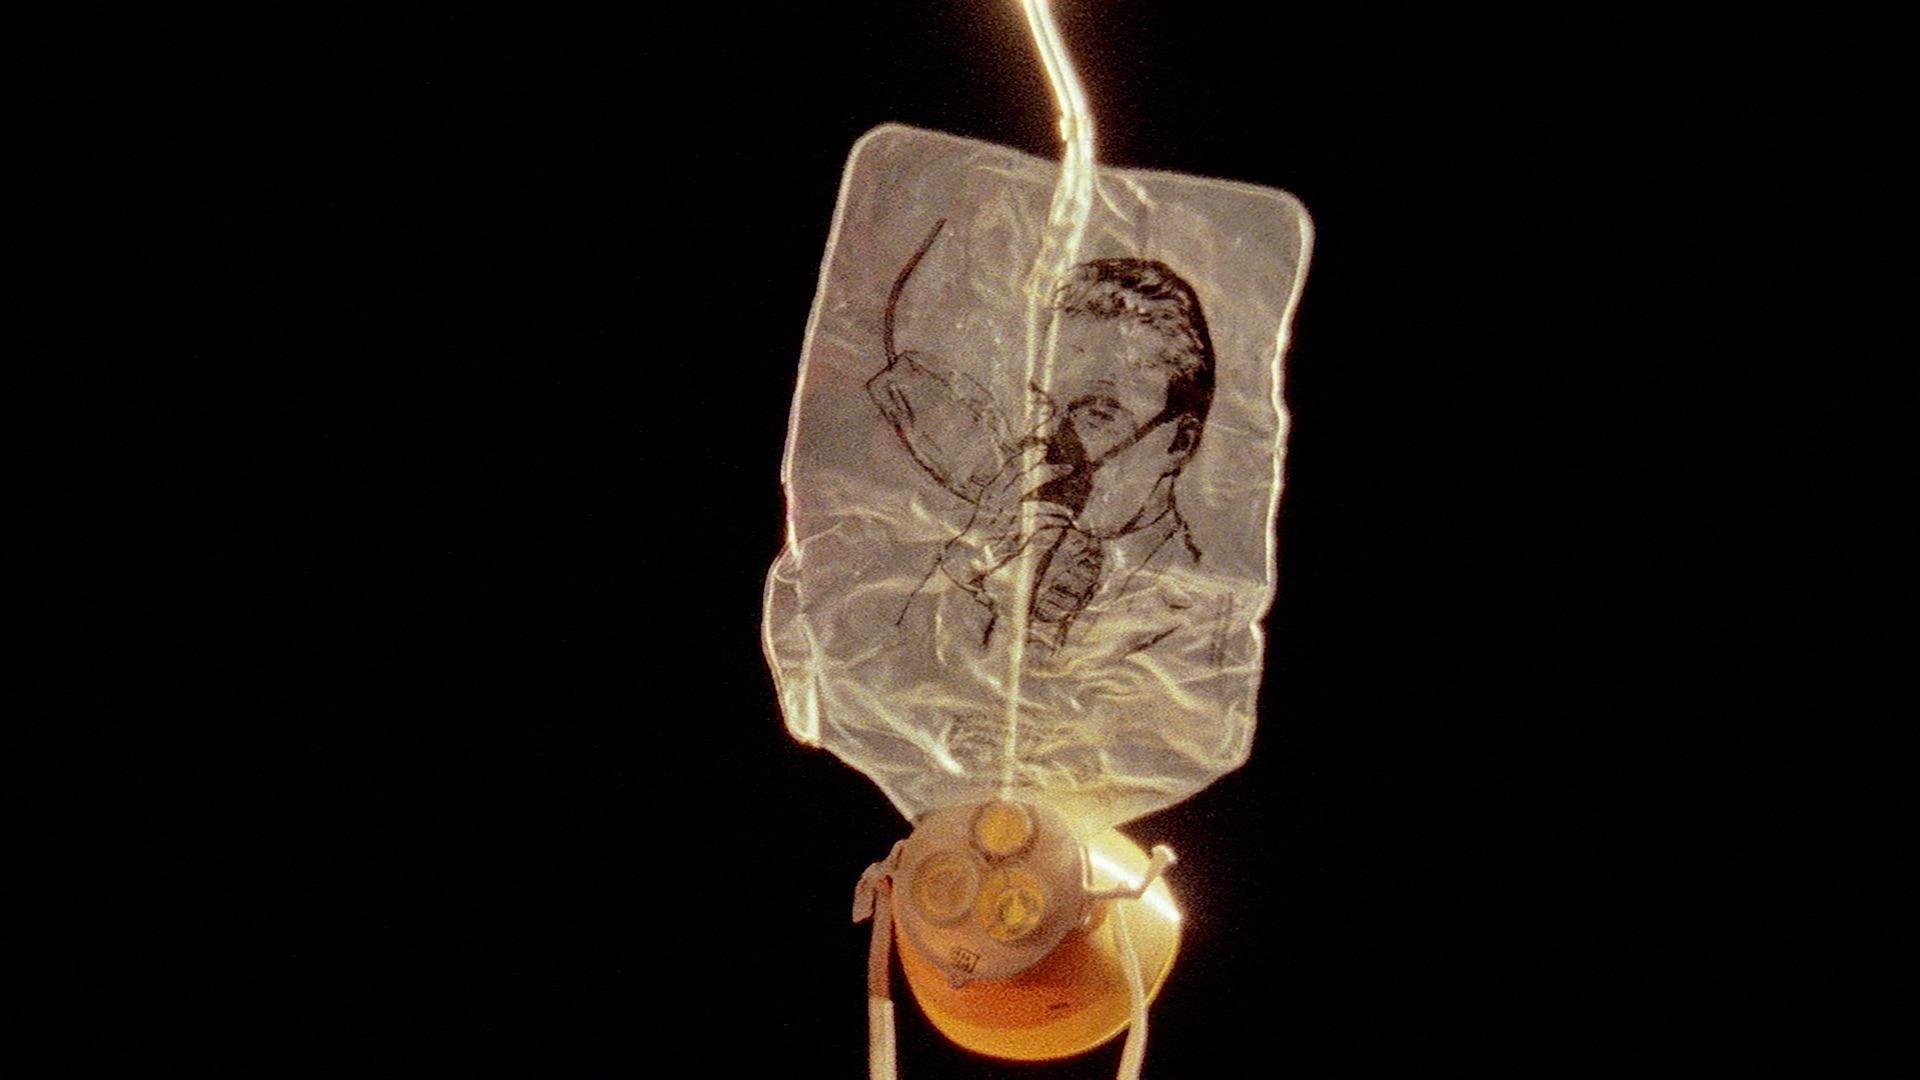 Video still from Hijacked showing a dangling oxygen mask.